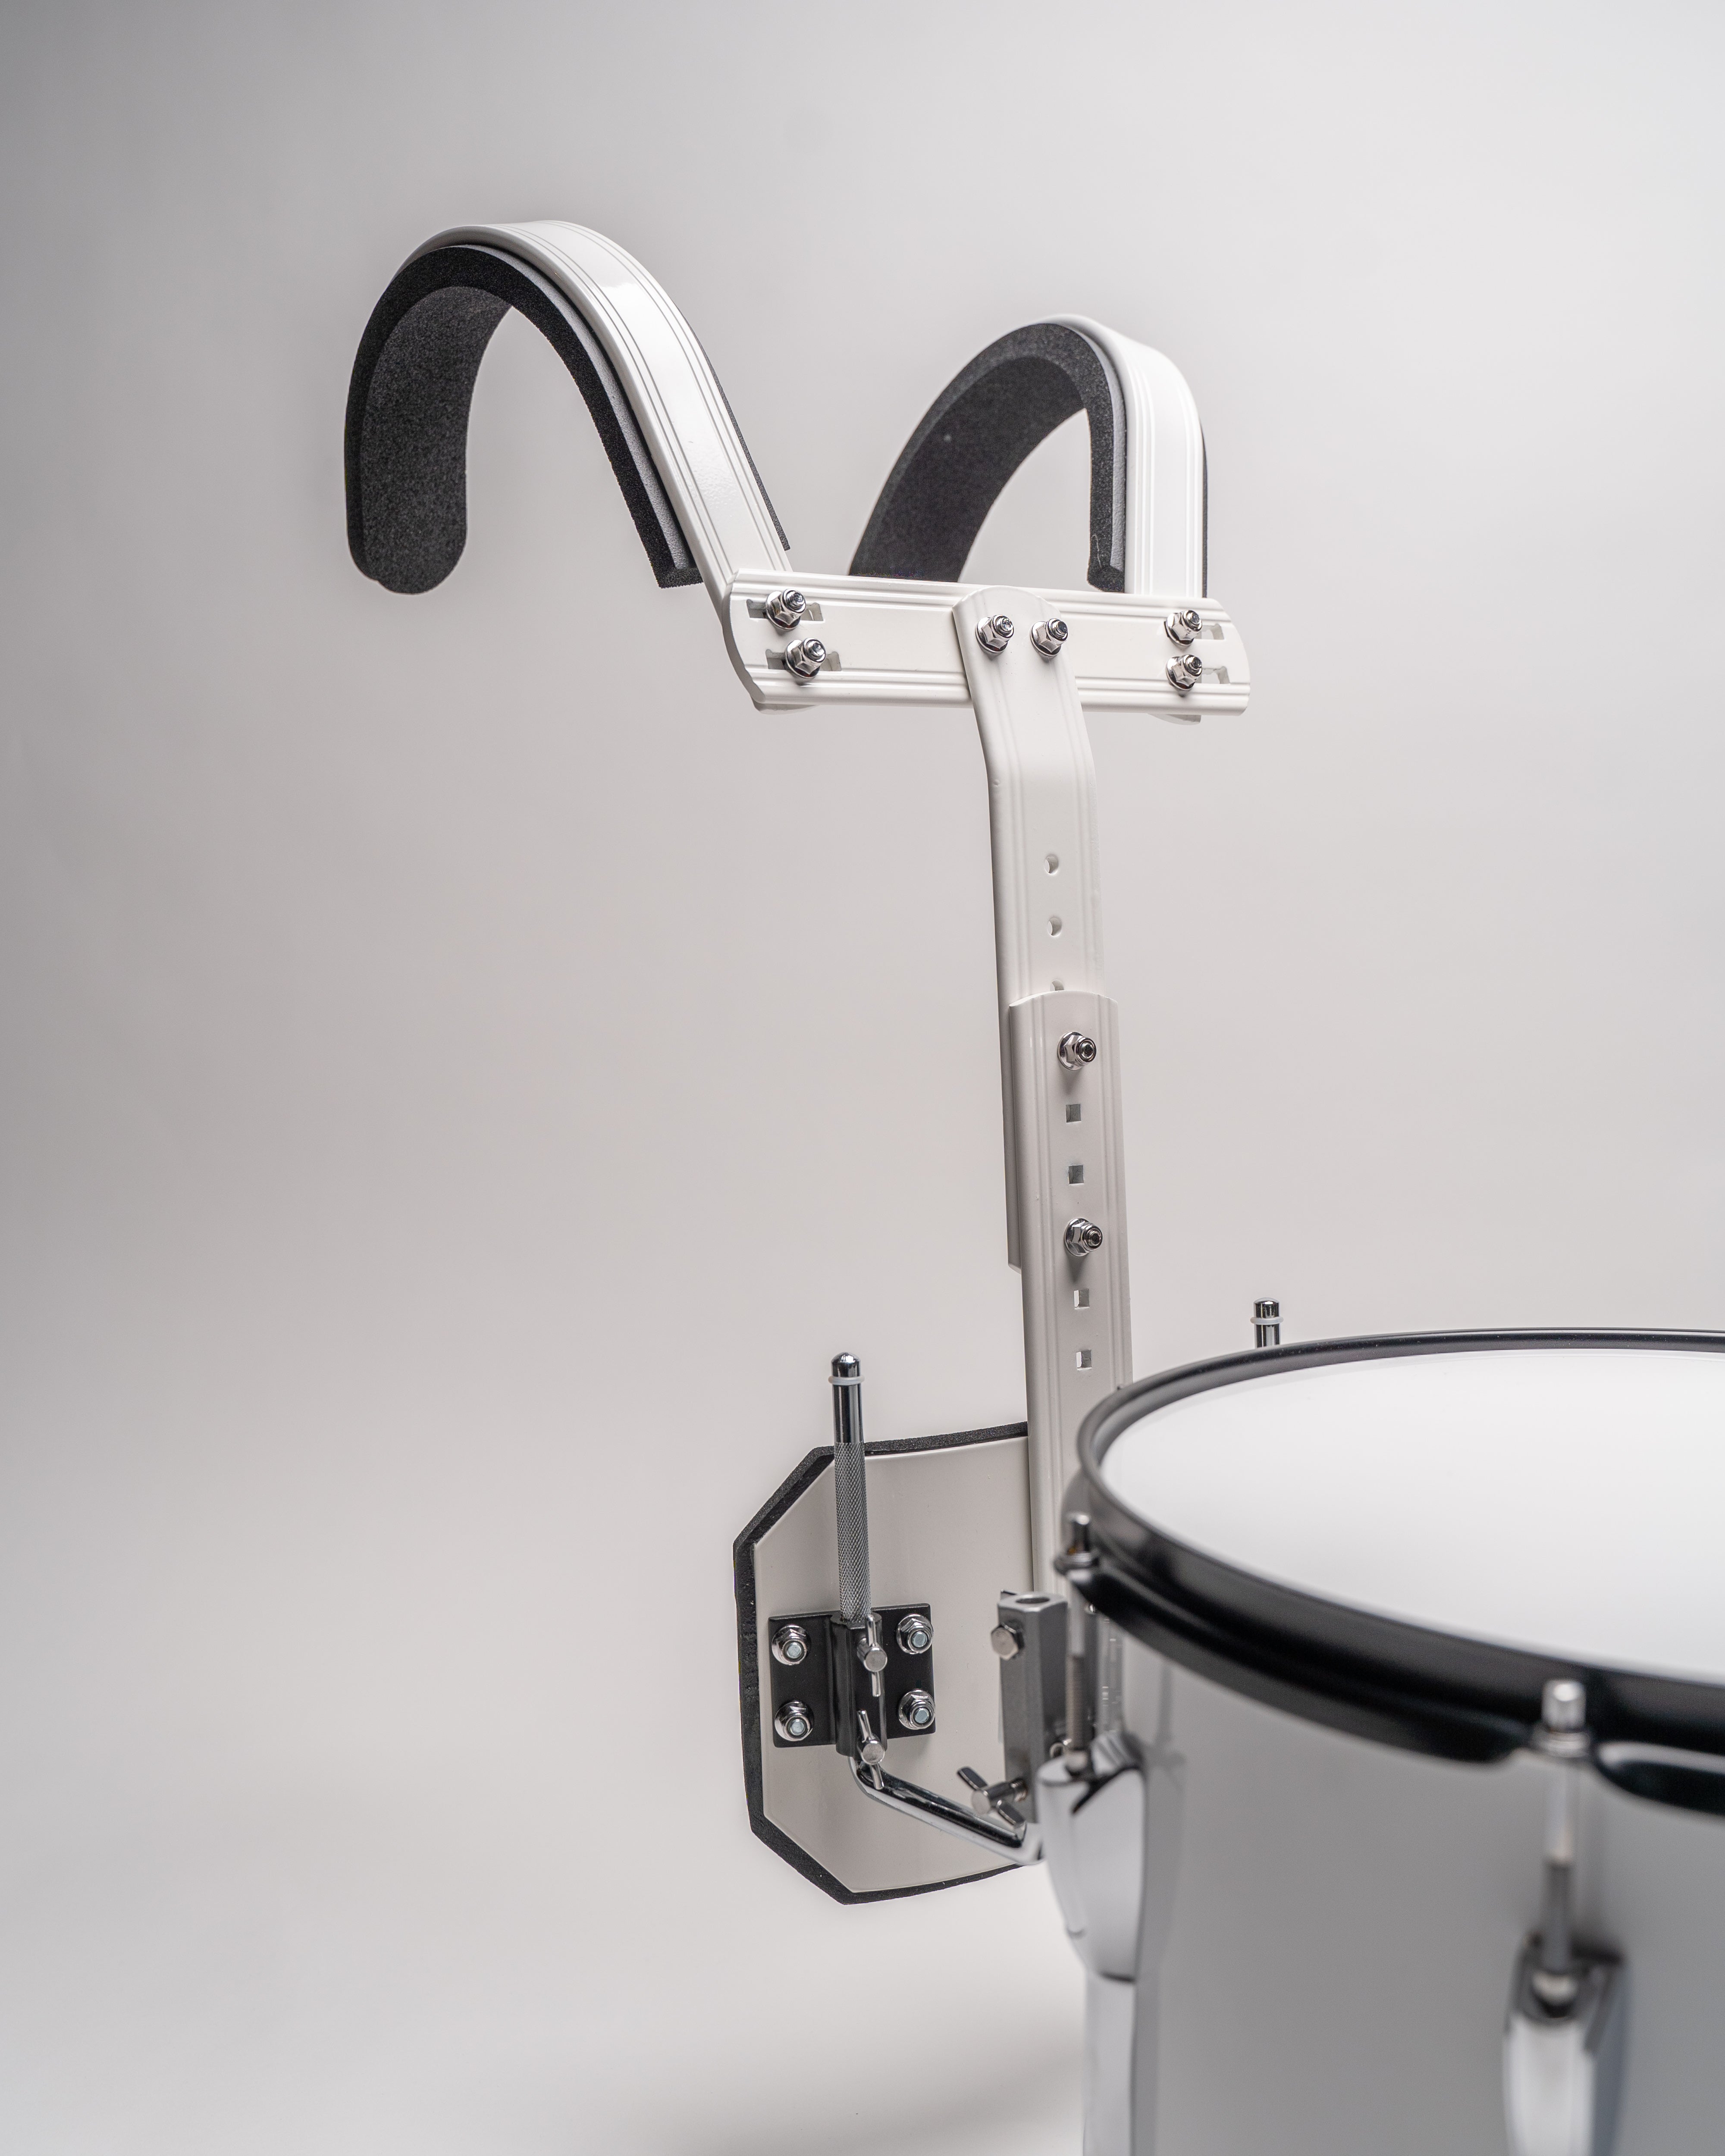 Marching Snare With Holder